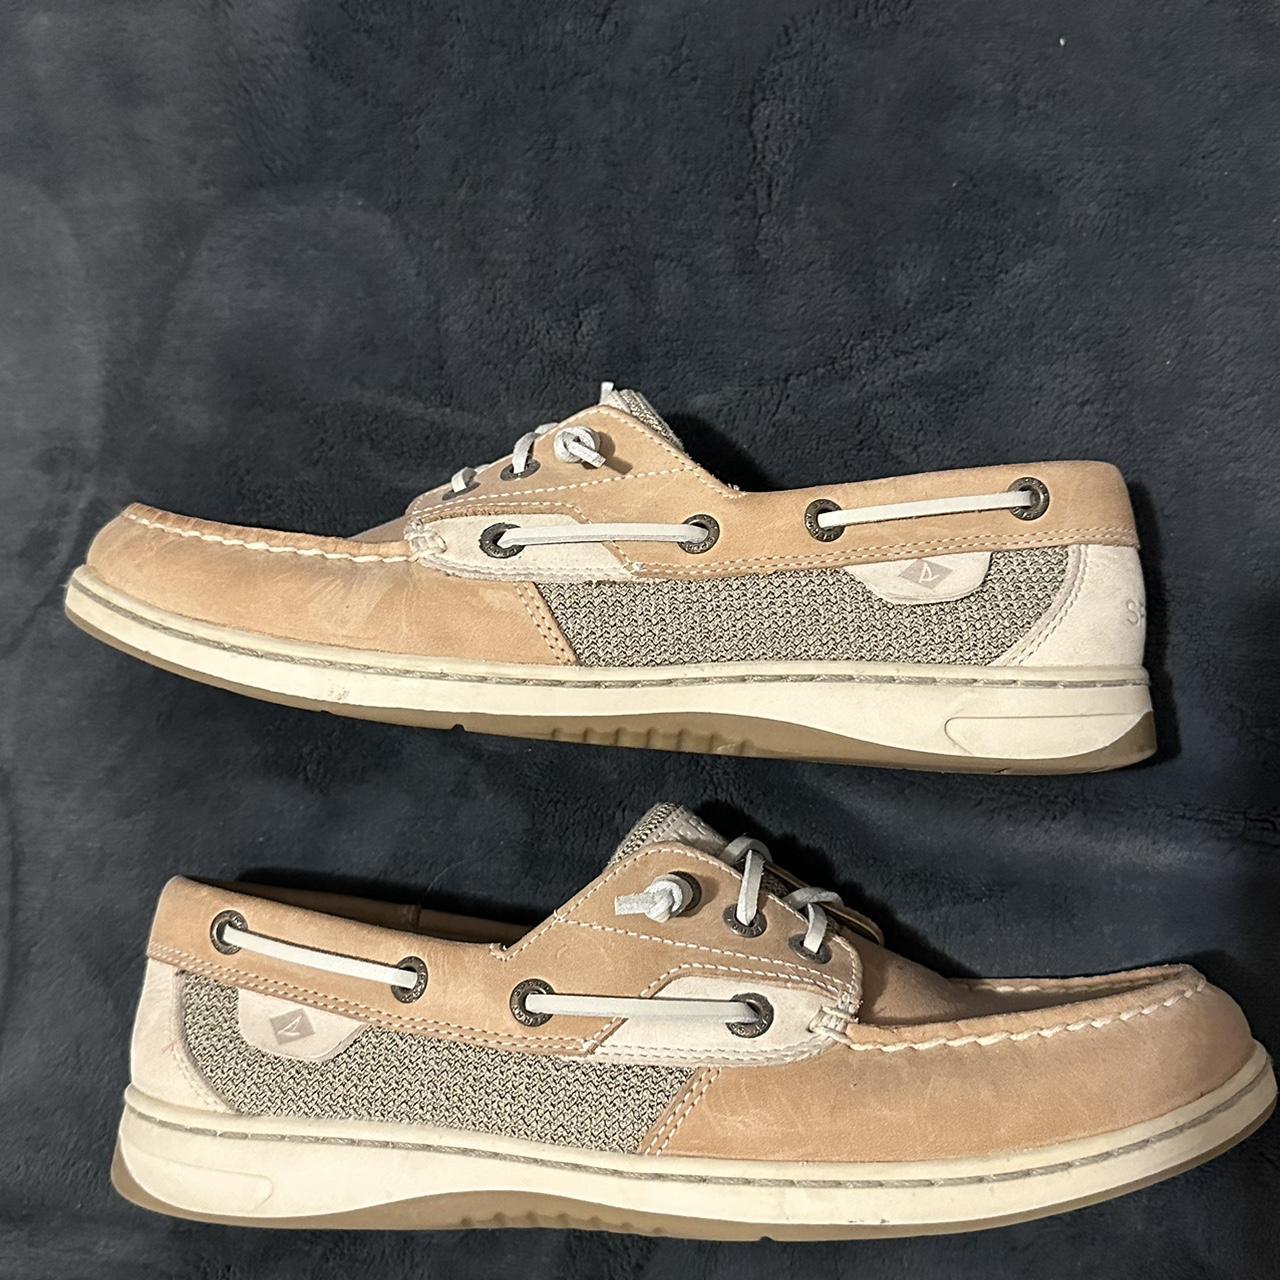 Sperry Women's Tan and Cream Boat-shoes (4)